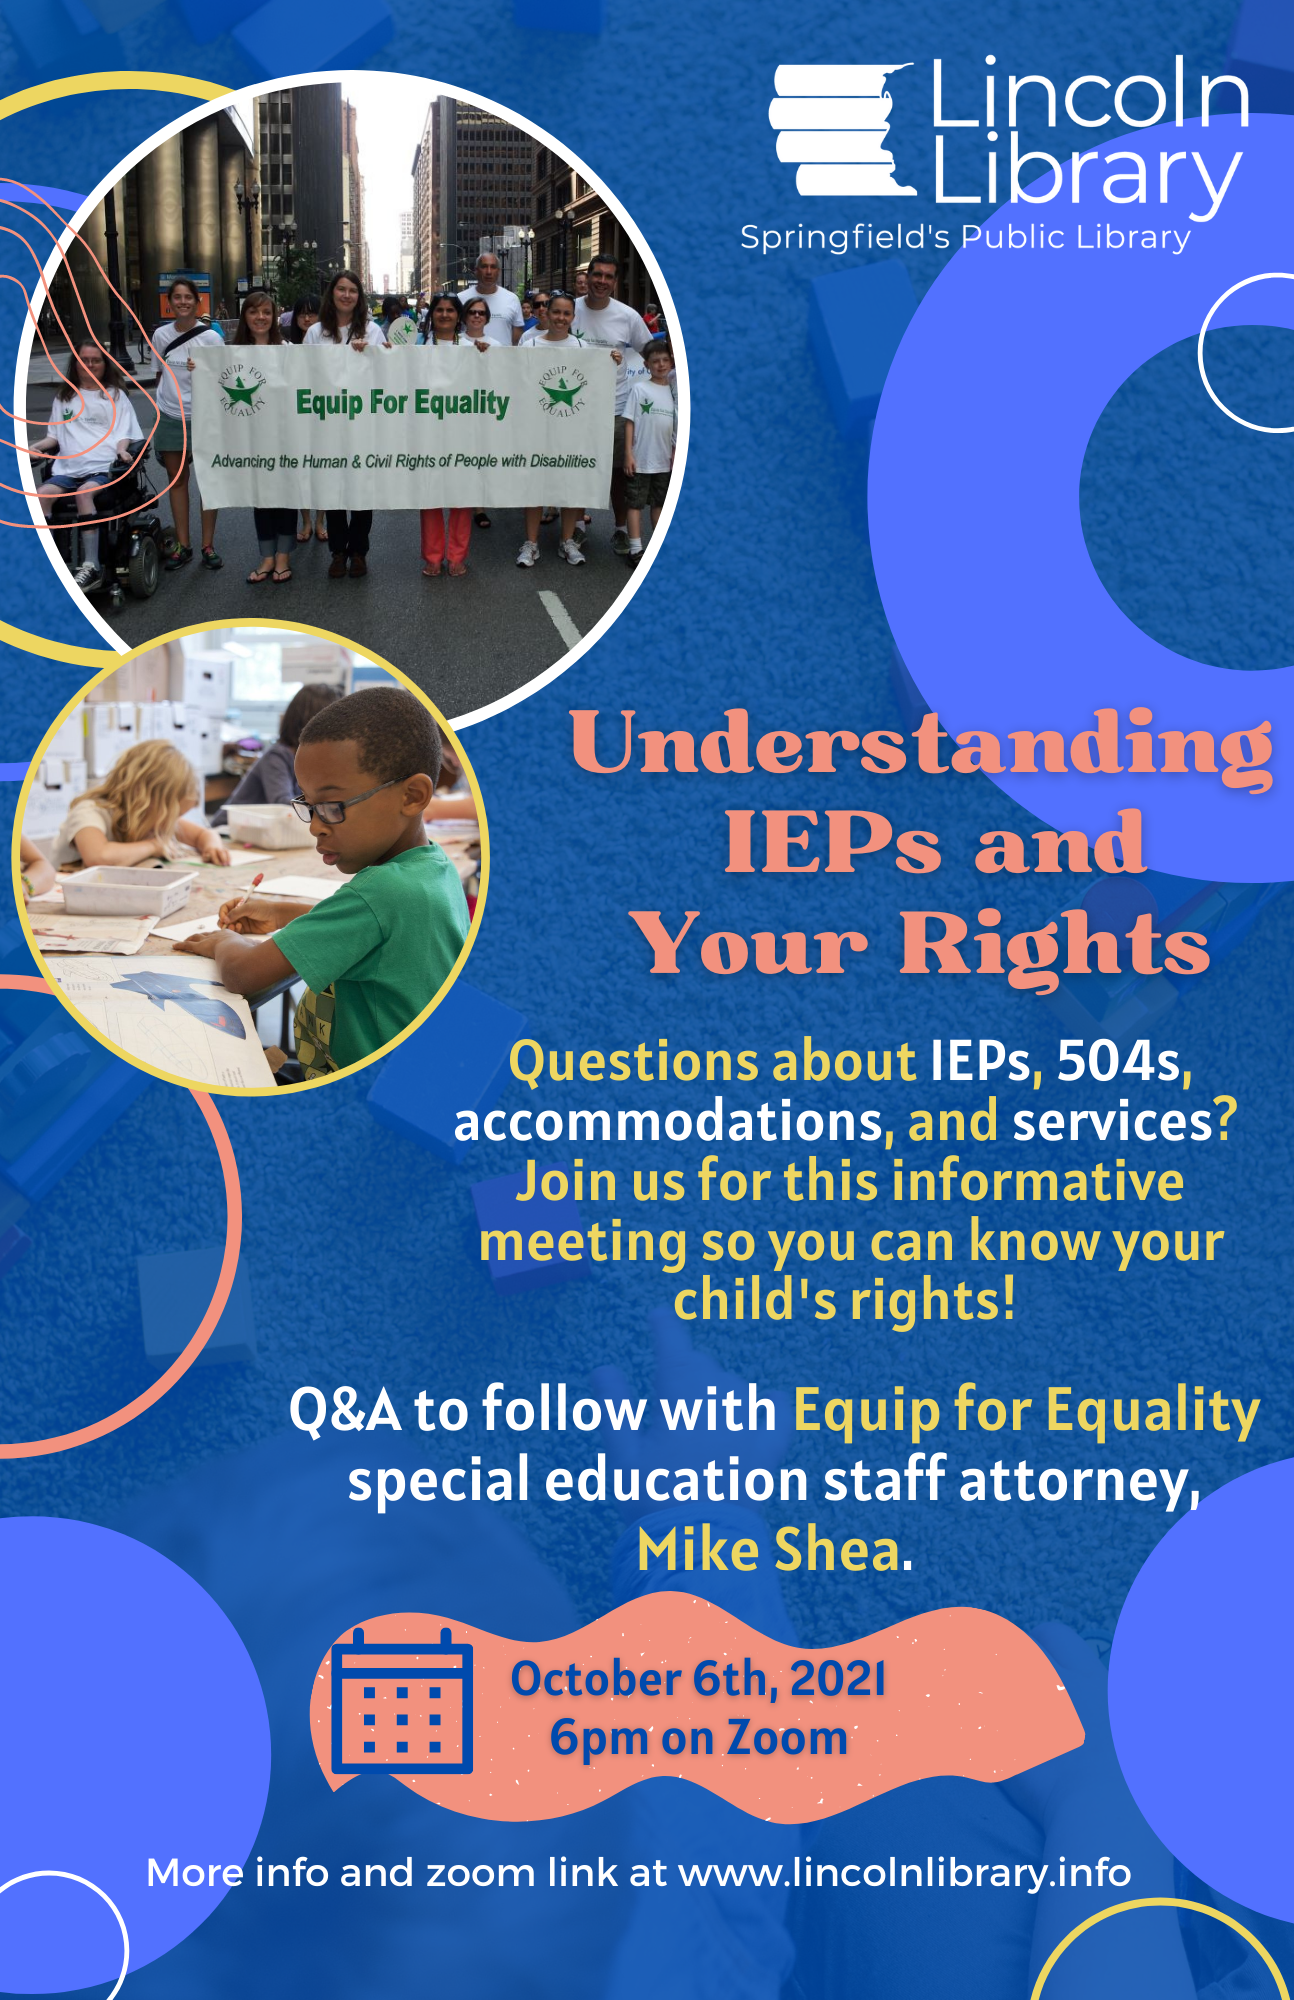 Parenting Seminar: Understanding IEPS and Your Rights